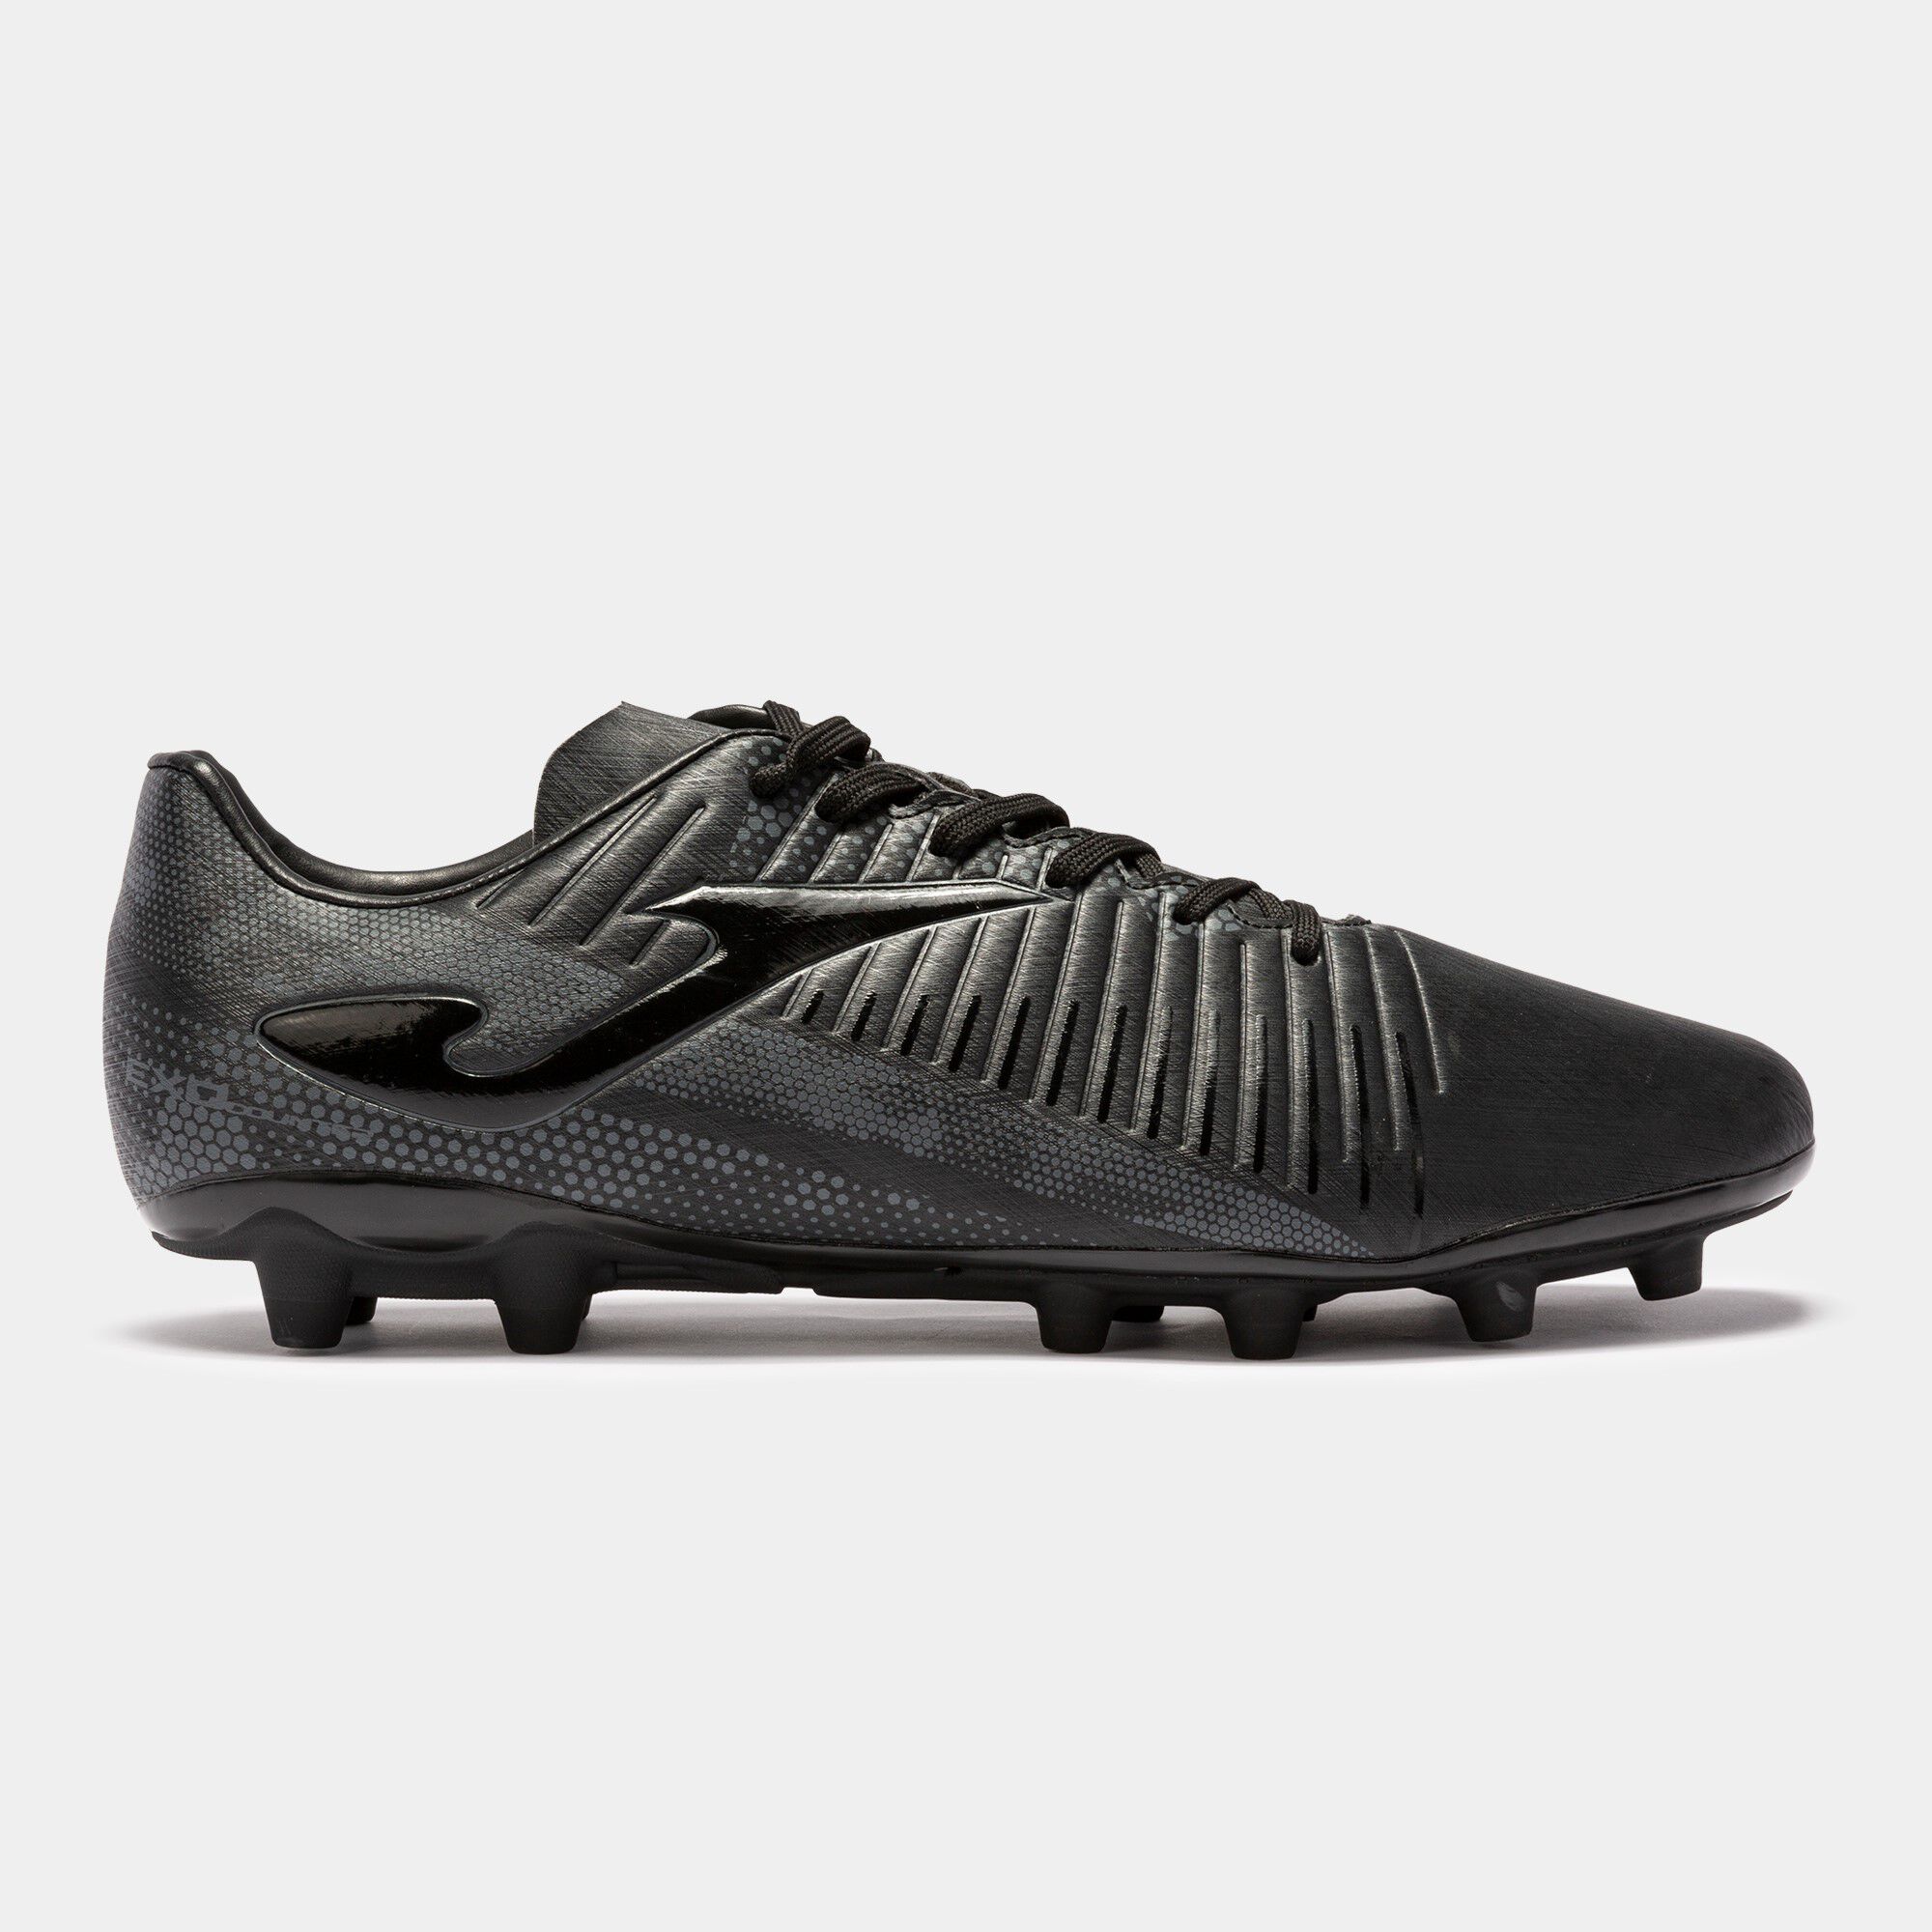 FOOTBALL BOOTS PROPULSION 21 FIRM GROUND FG BLACK